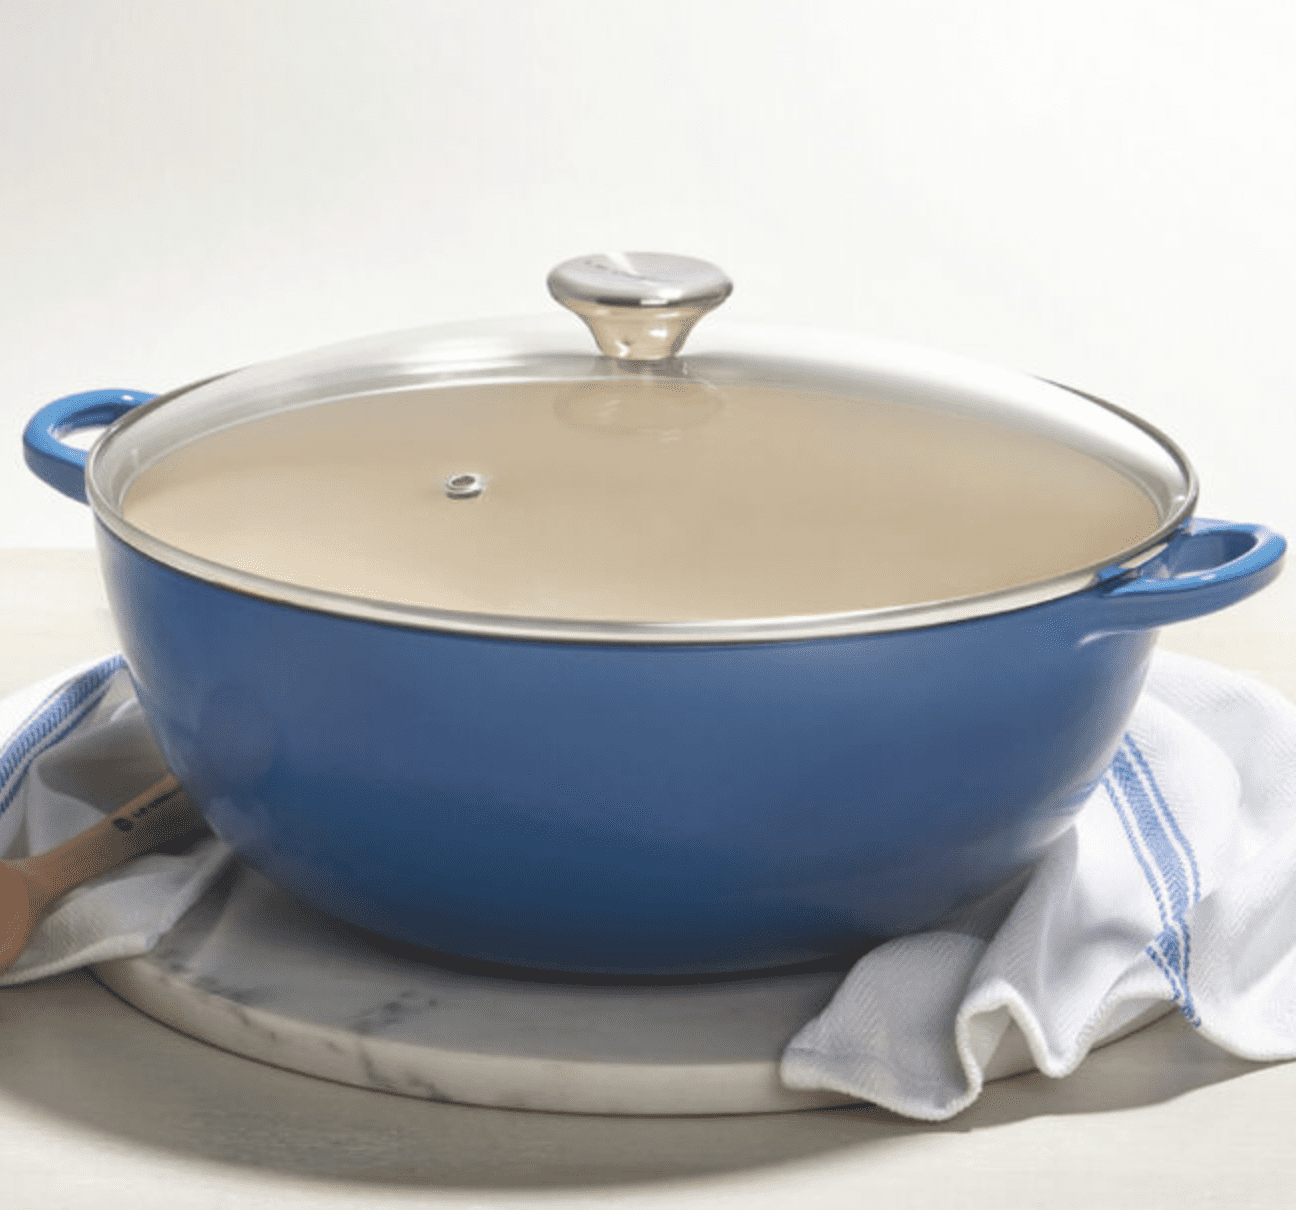 https://cdn.apartmenttherapy.info/image/upload/v1672849051/commerce/Le-Creuset-Soup-Pot-with-Glass-Lid.png